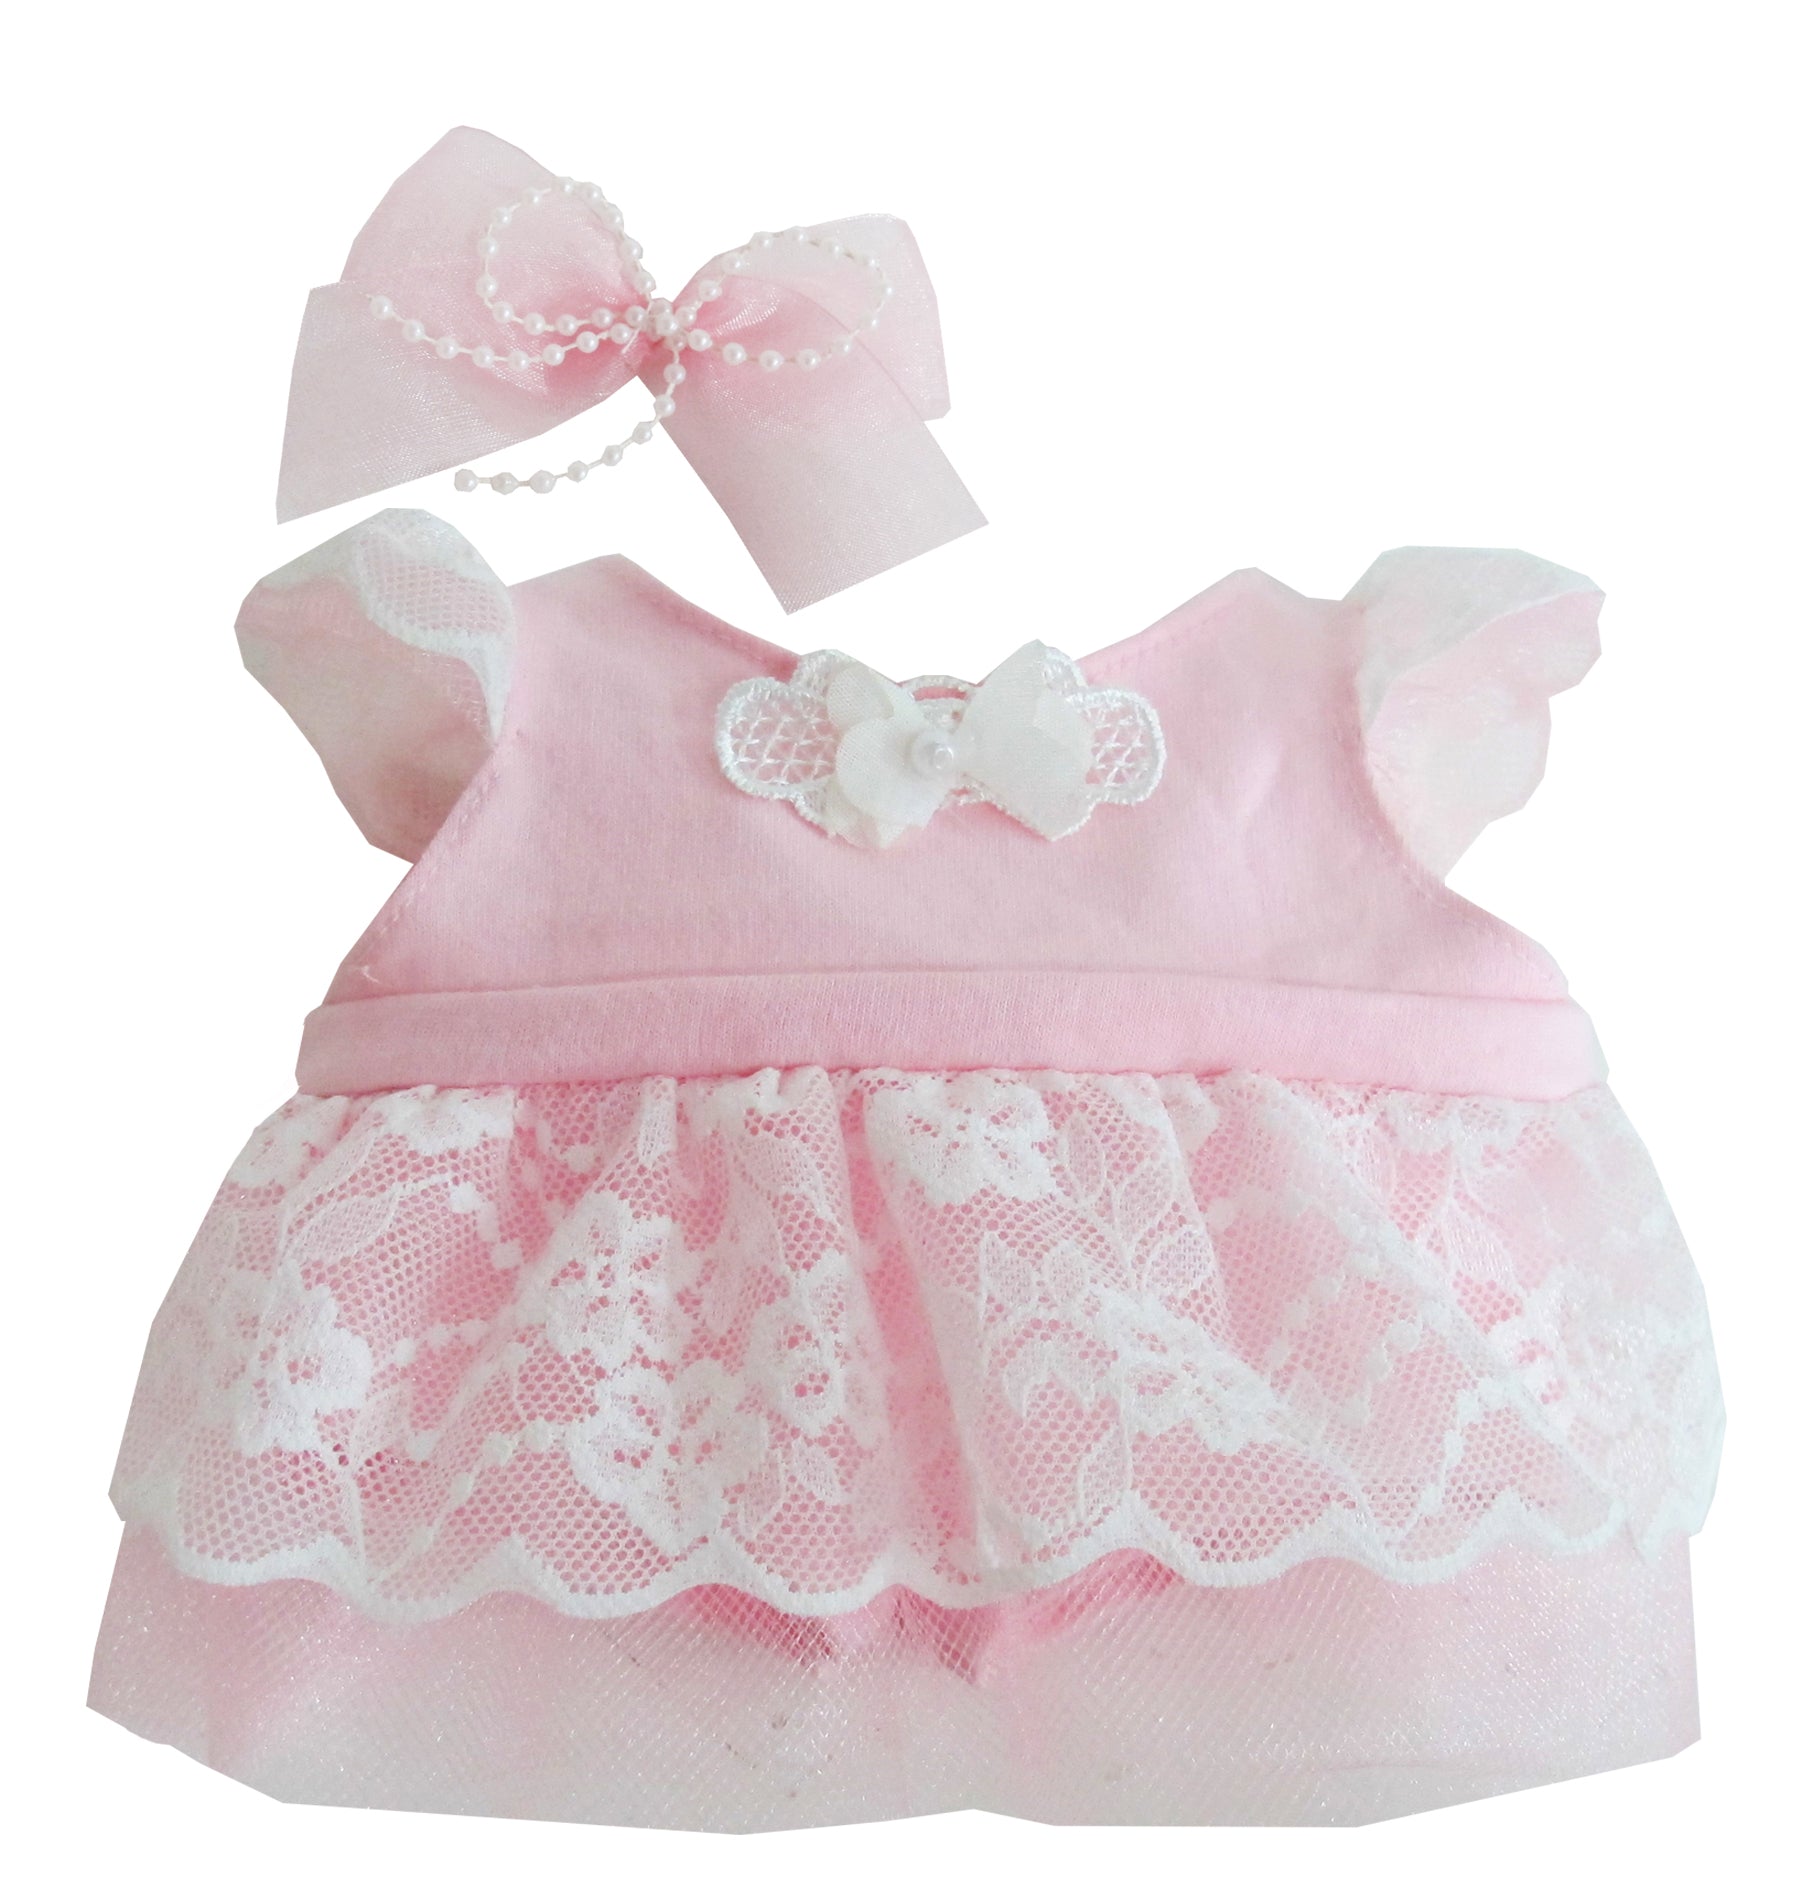 SWEETY LACE DRESS 10" - 31" LOVELY